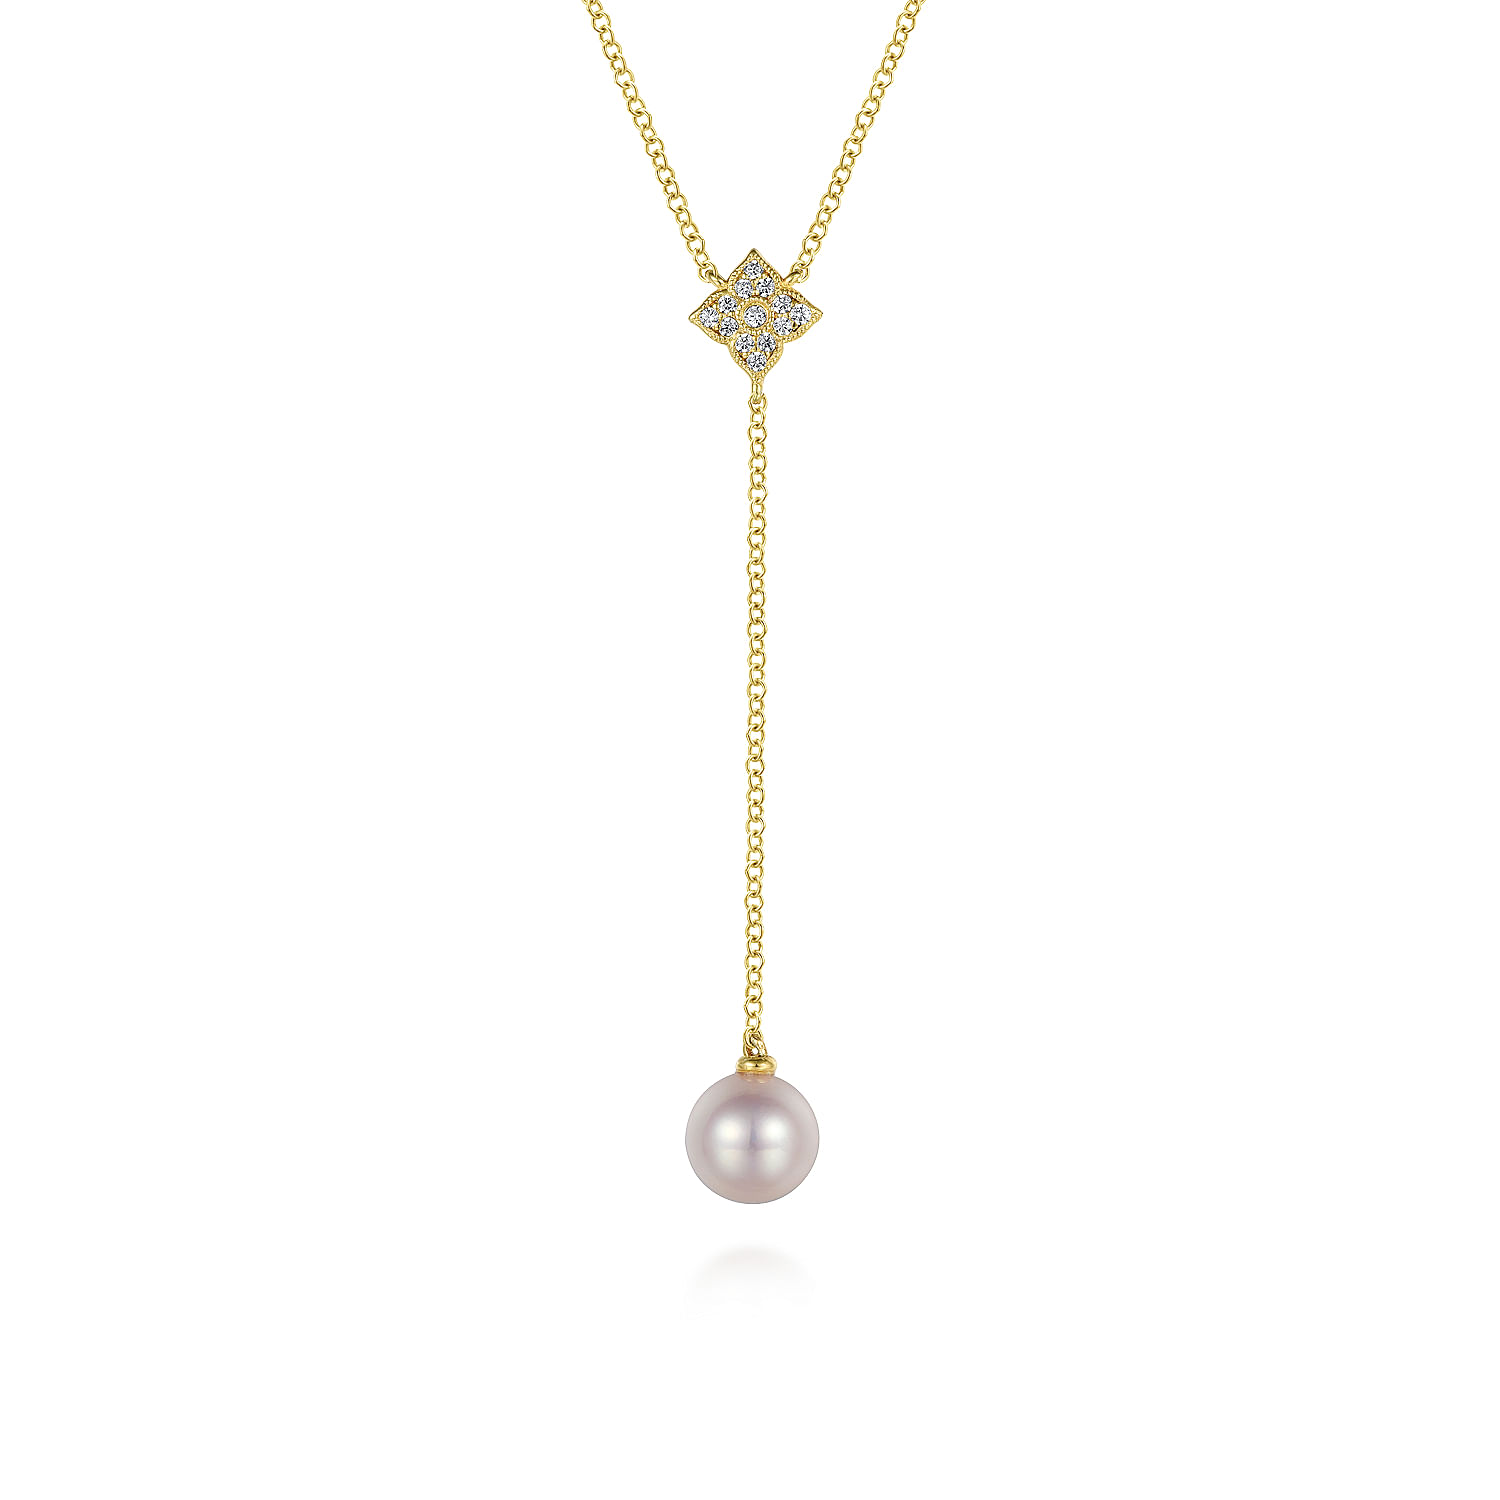 14K Yellow Gold Diamond and Pearl Lariat Necklace